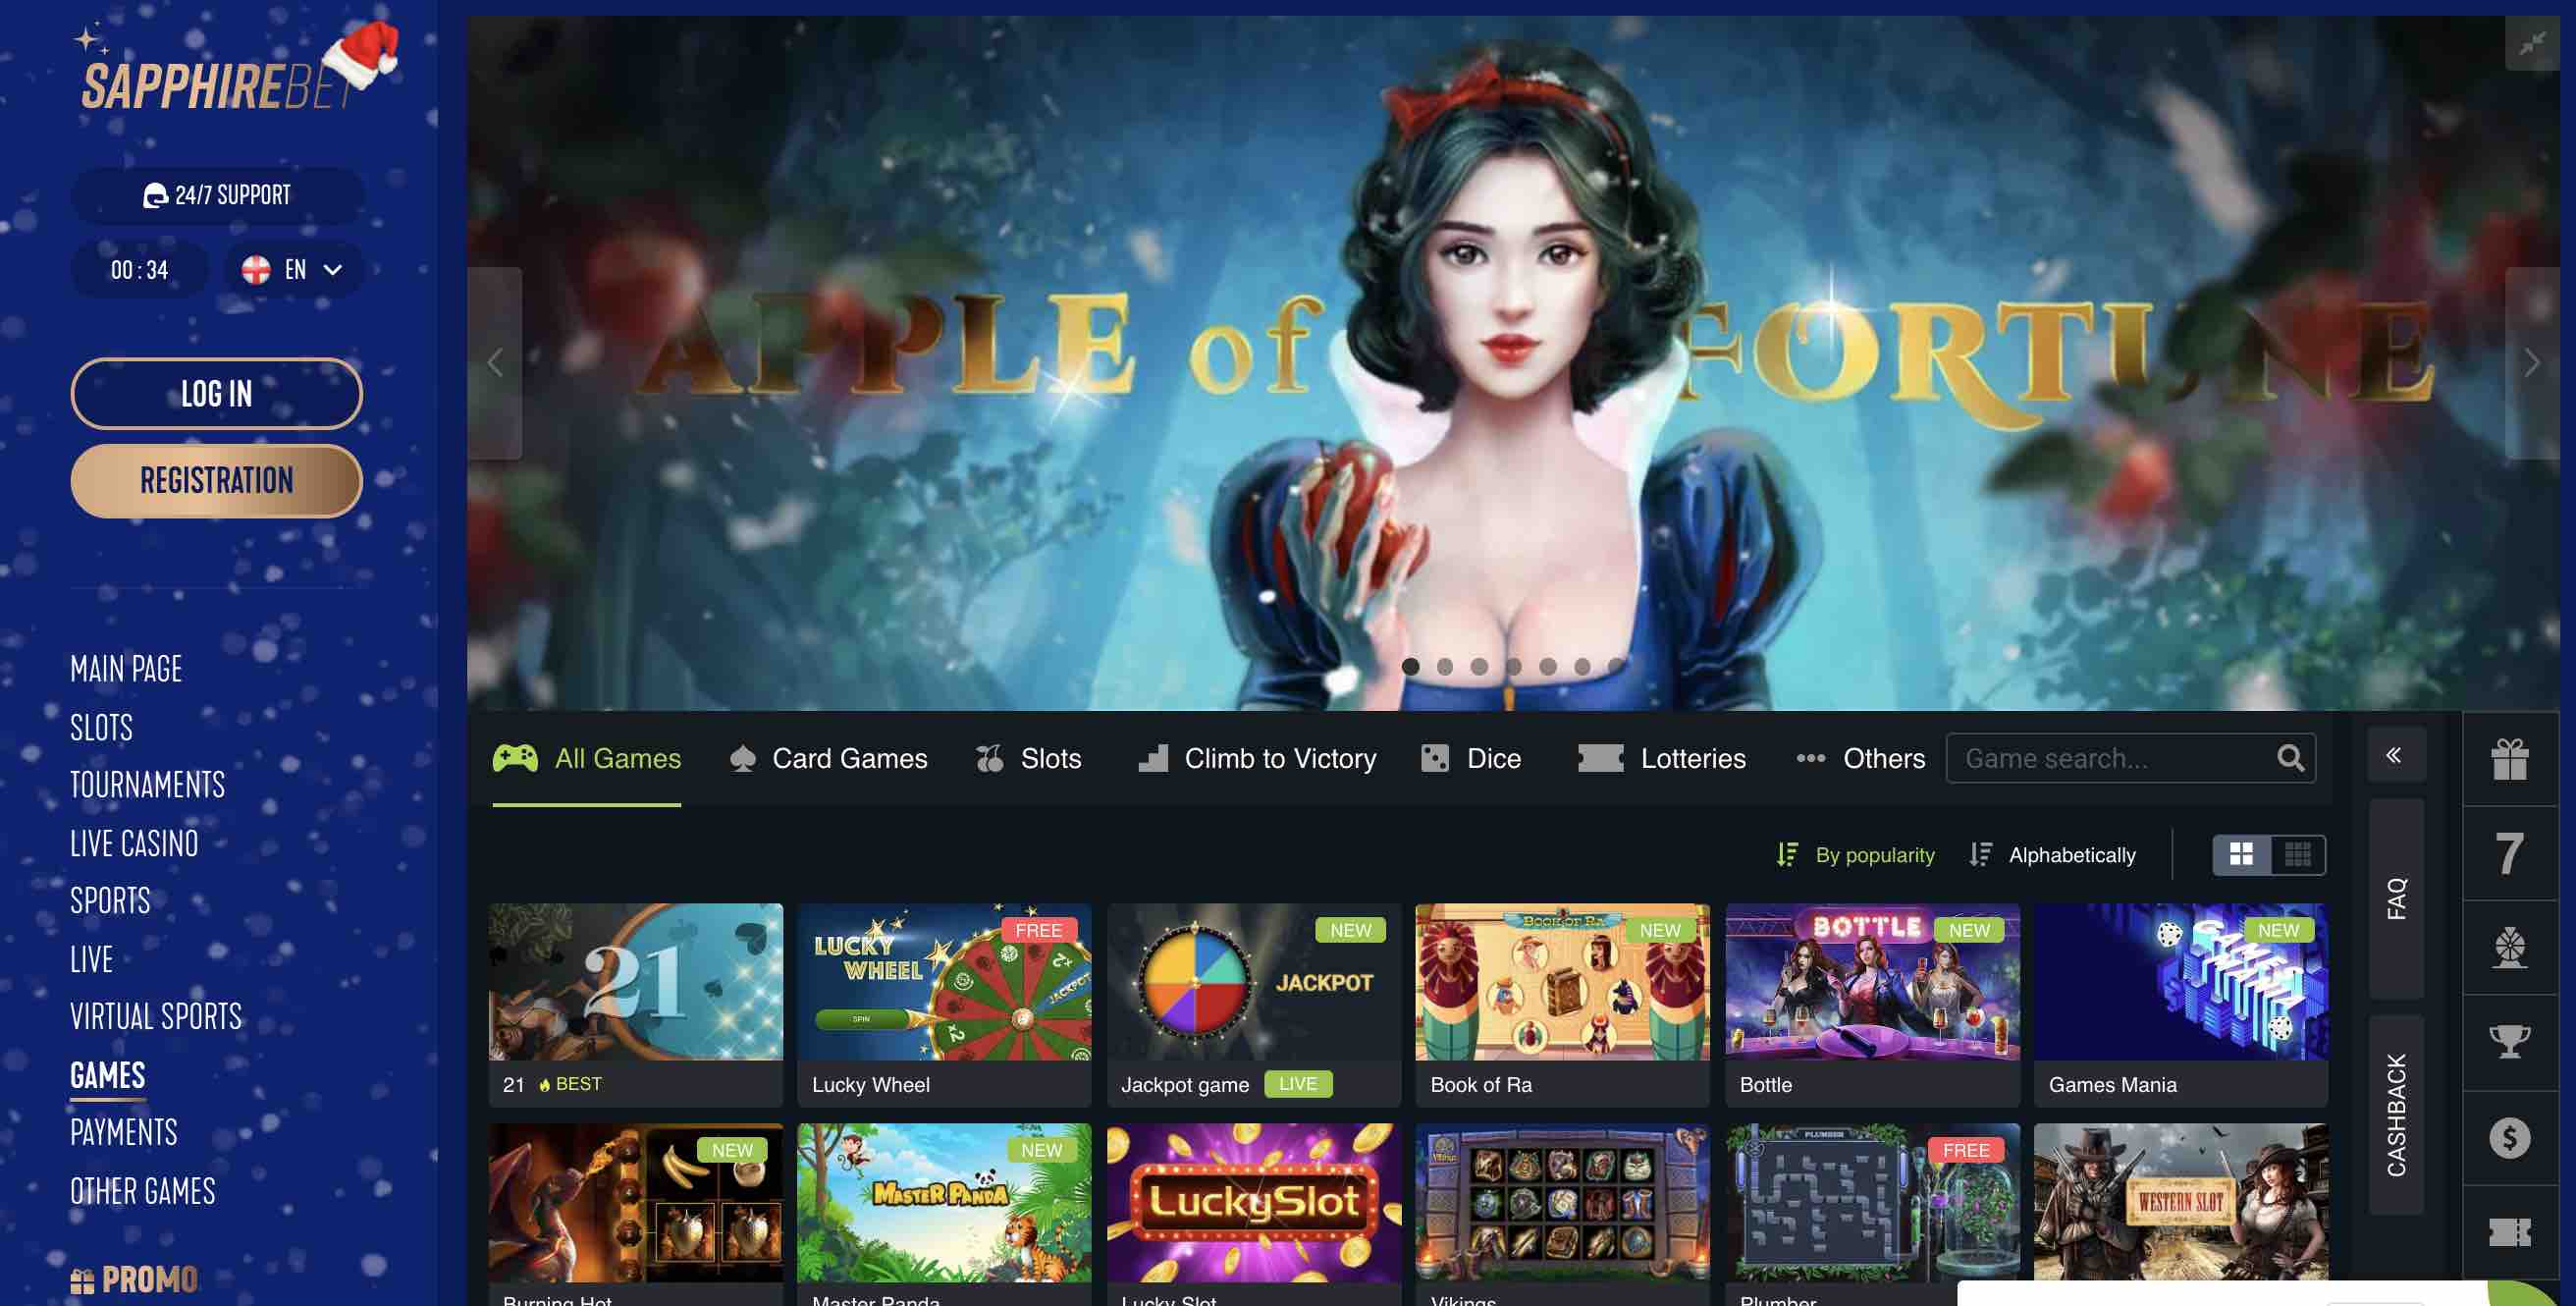 Top Slots and More at Sapphire Bet